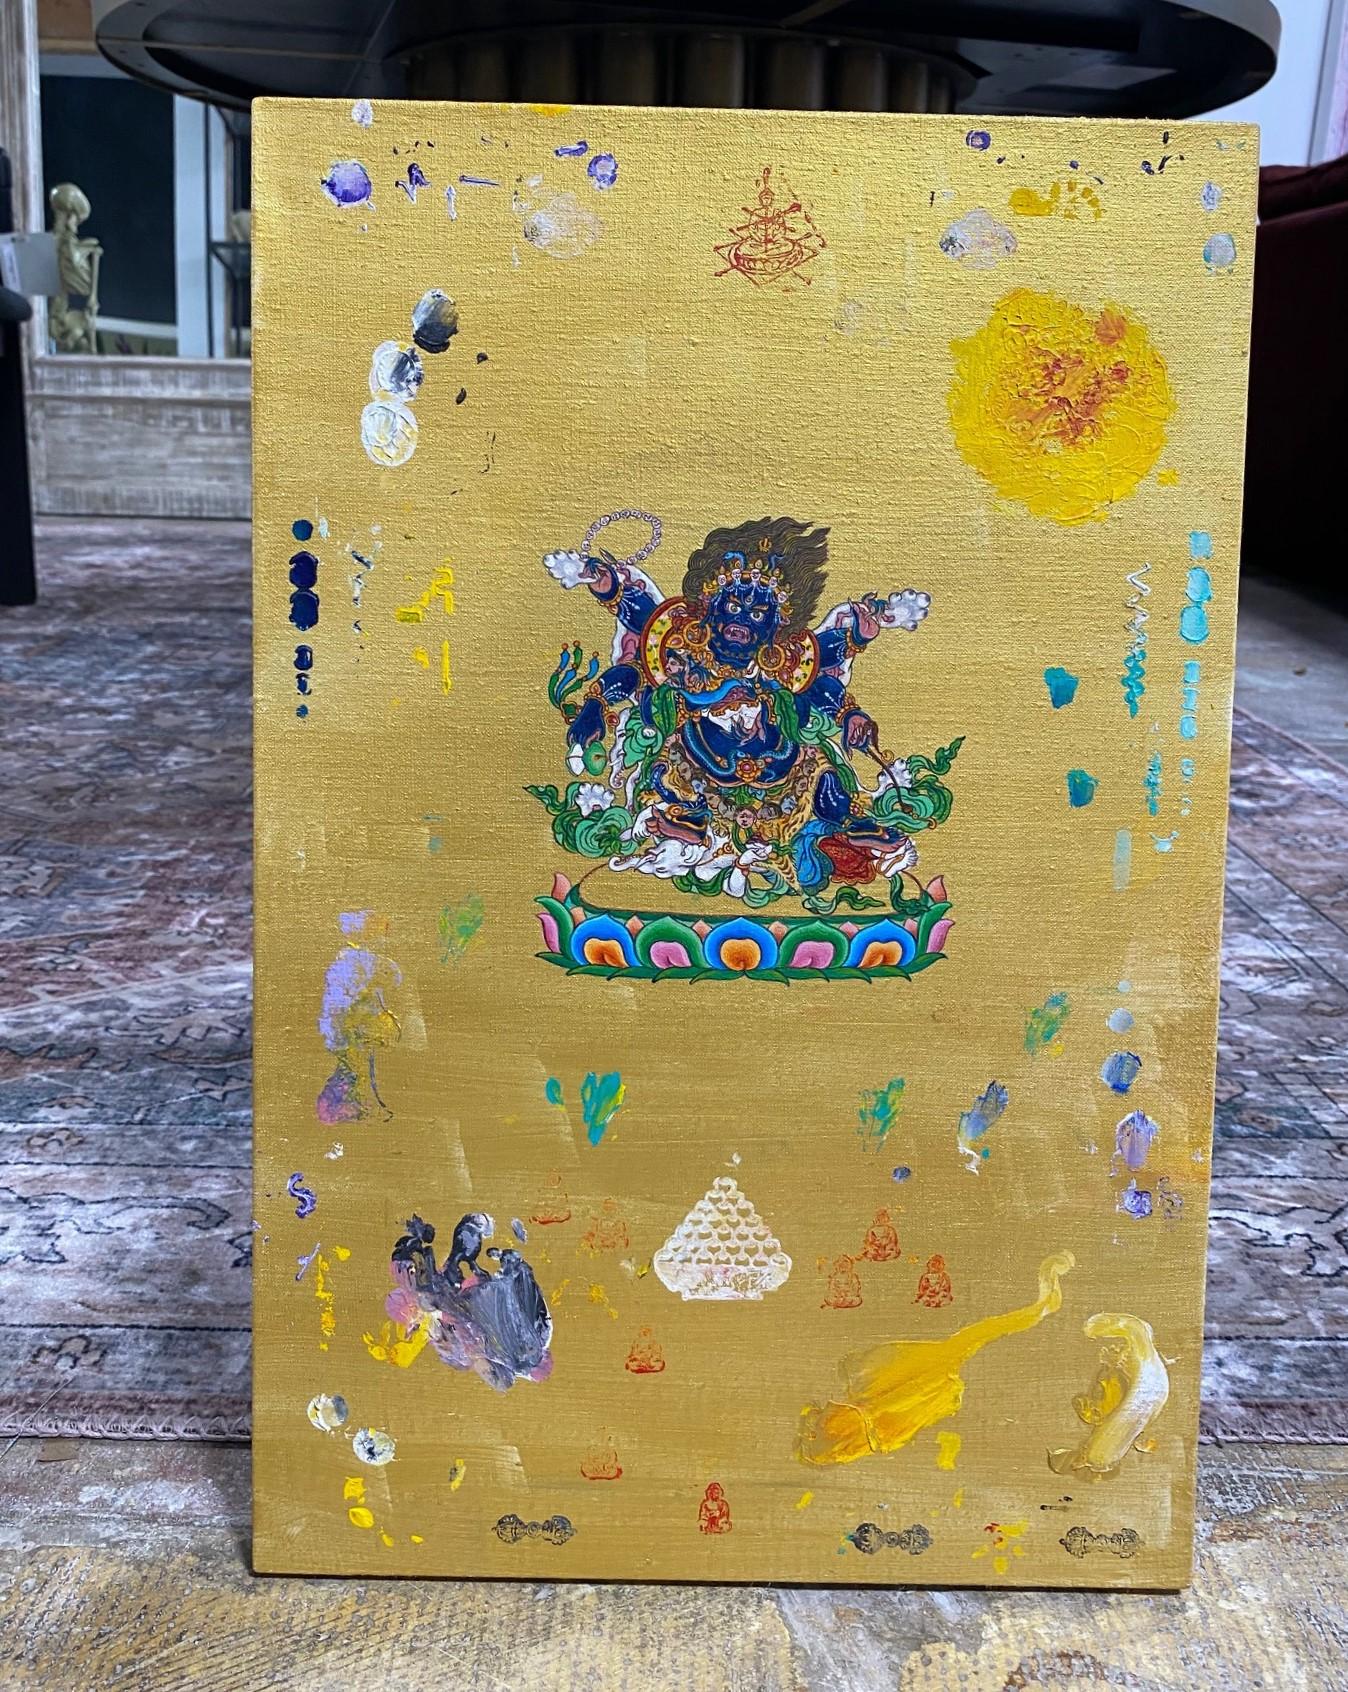 A beautiful original painting of a Tibetan Buddhist deity by Australian artist Tim Johnson. The bold colors and detail of the deity are quite skilled and intricate. Johnson was born in Sydney in 1947. His artistic career began in the 1960s. His